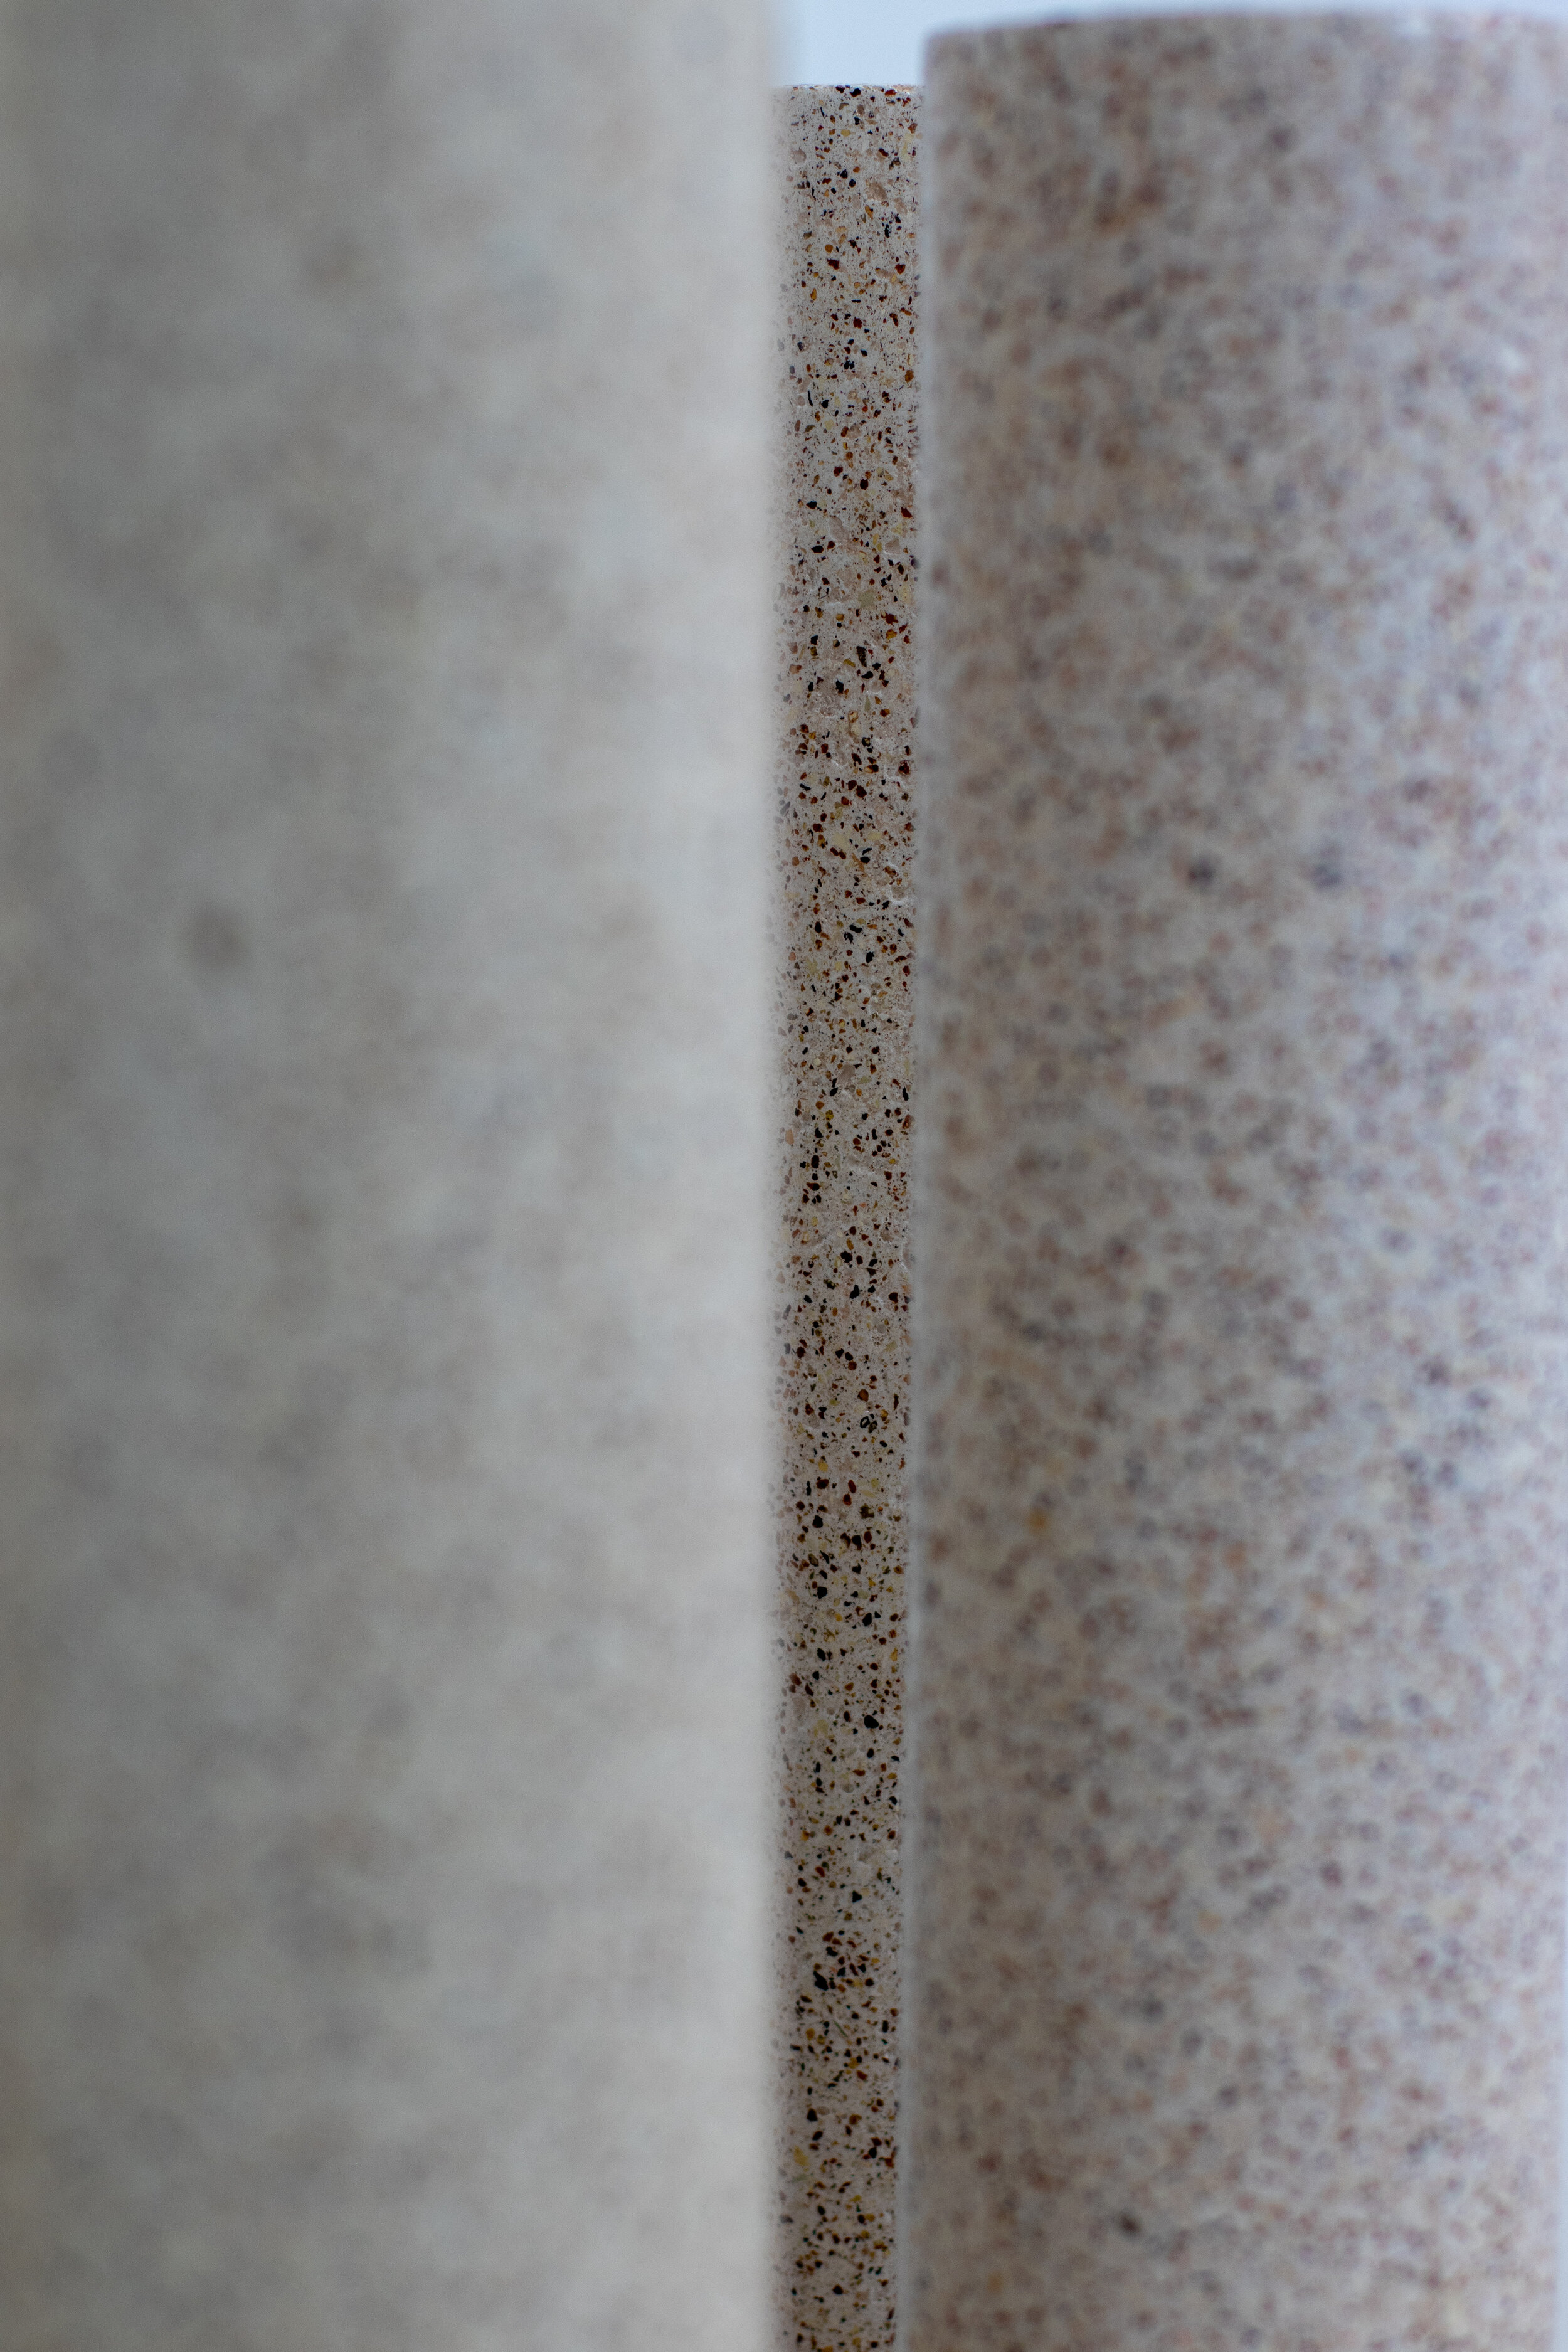 Dan Elborne. Permanence. ceramic particles and concrete. 2019. photography by Kirsty Lee.jpg